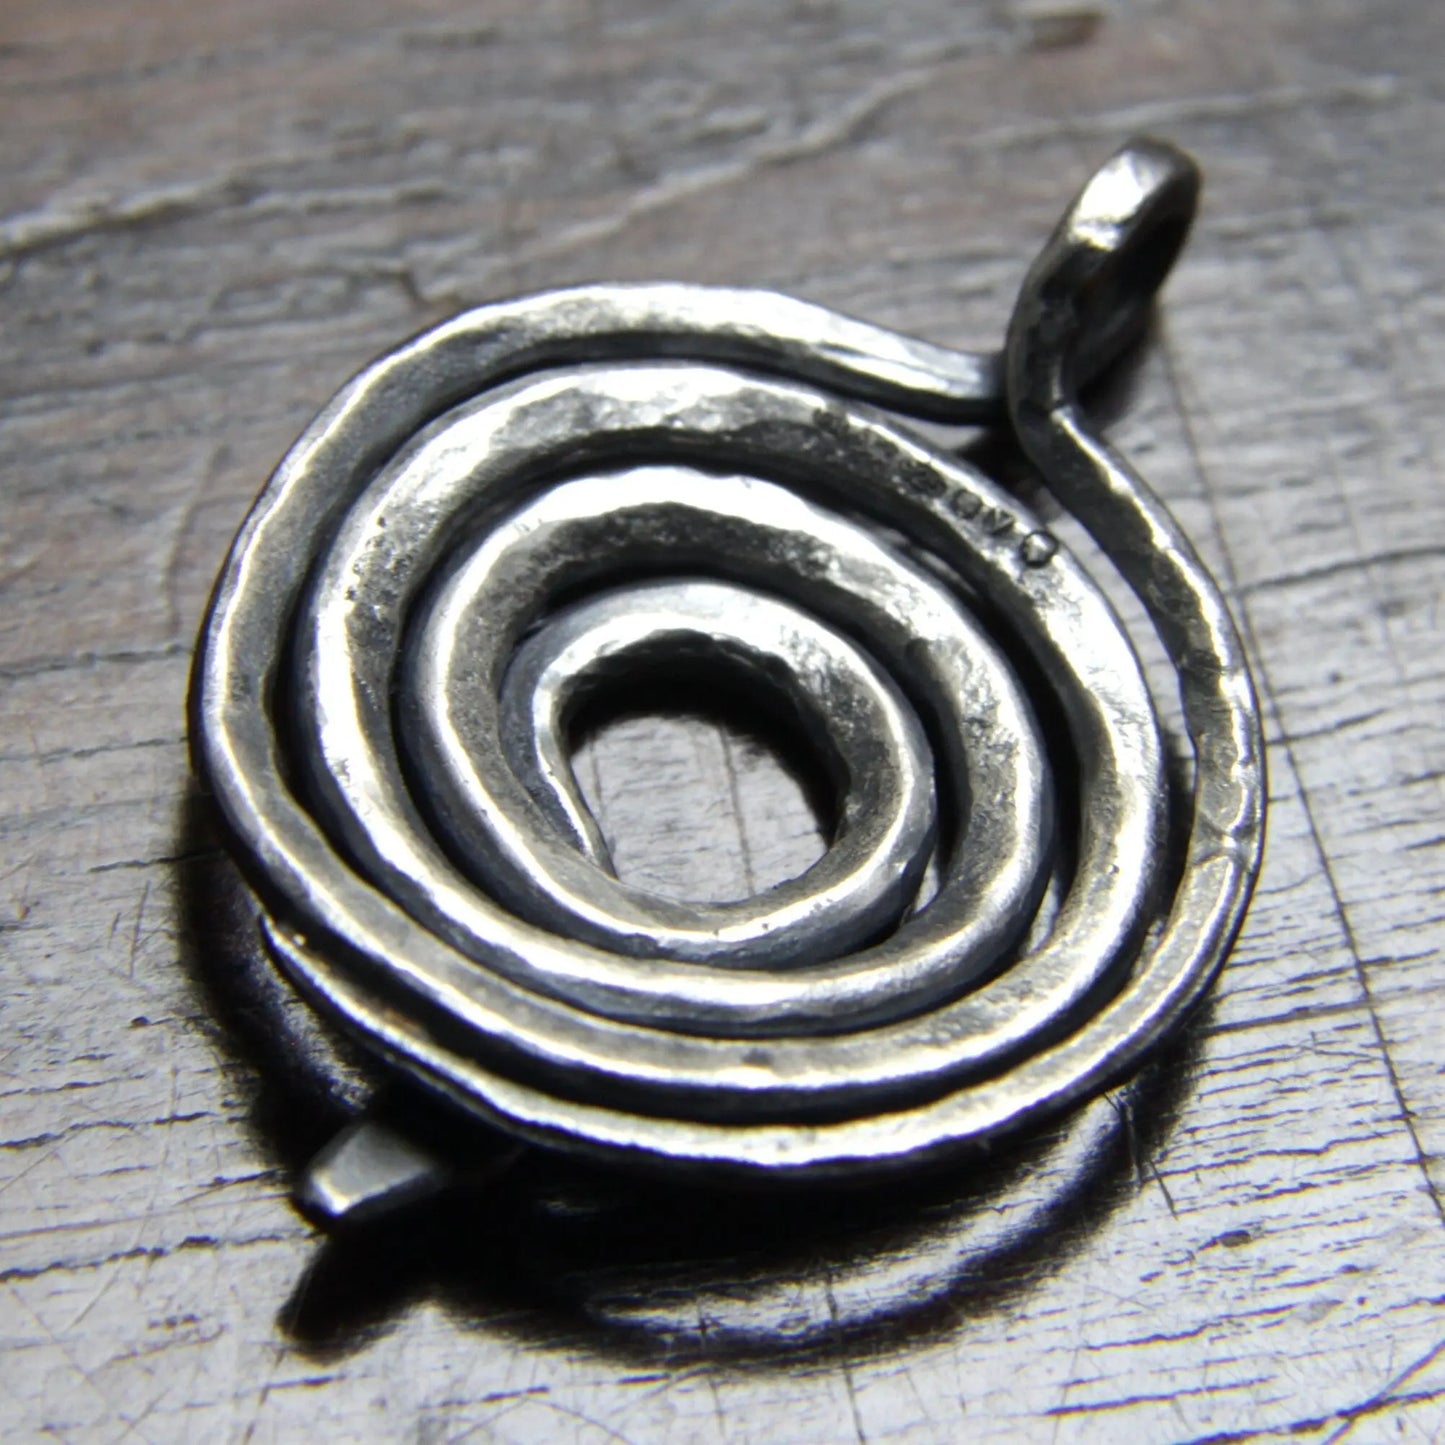 Forged Silver Snake Pendant